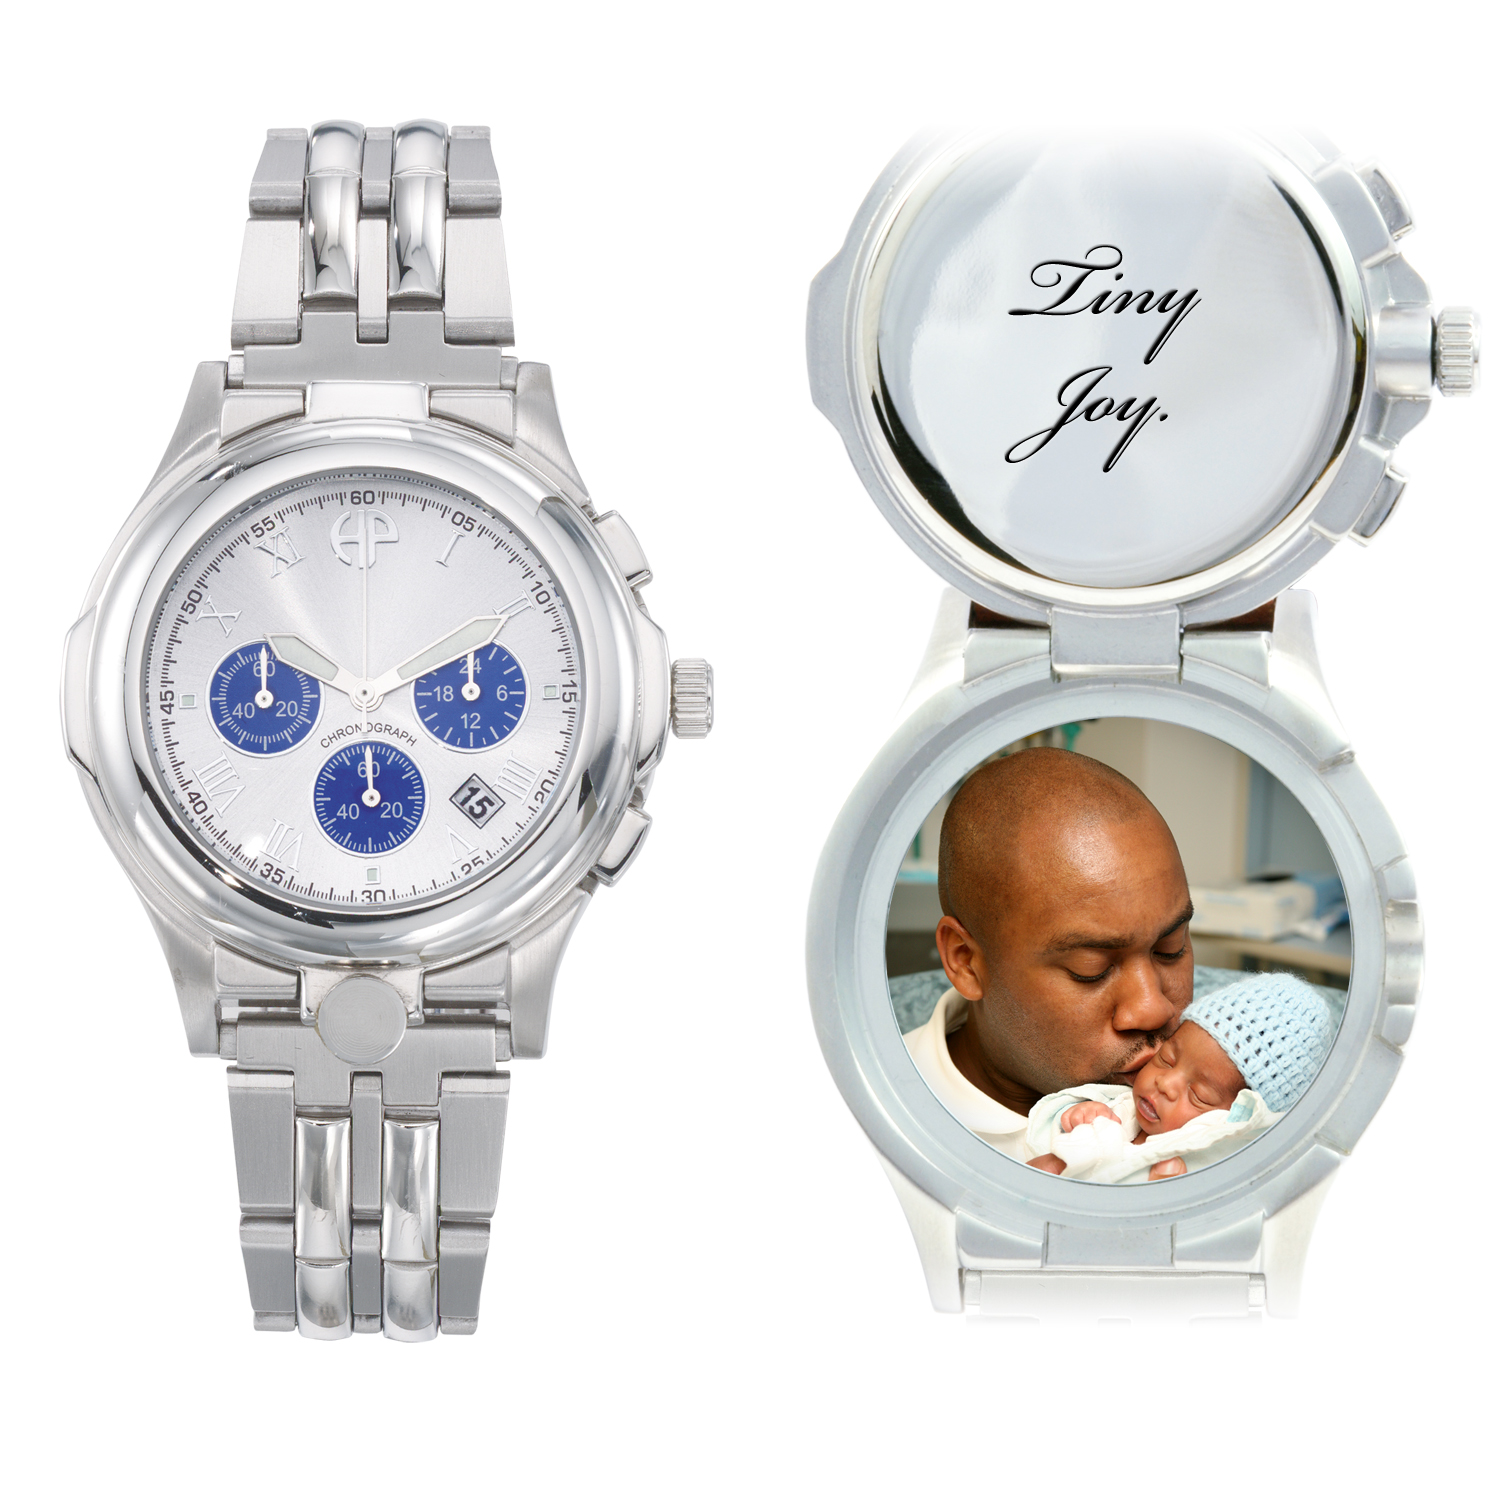 Hourpower Watches Partners With March Of Dimes In Time For